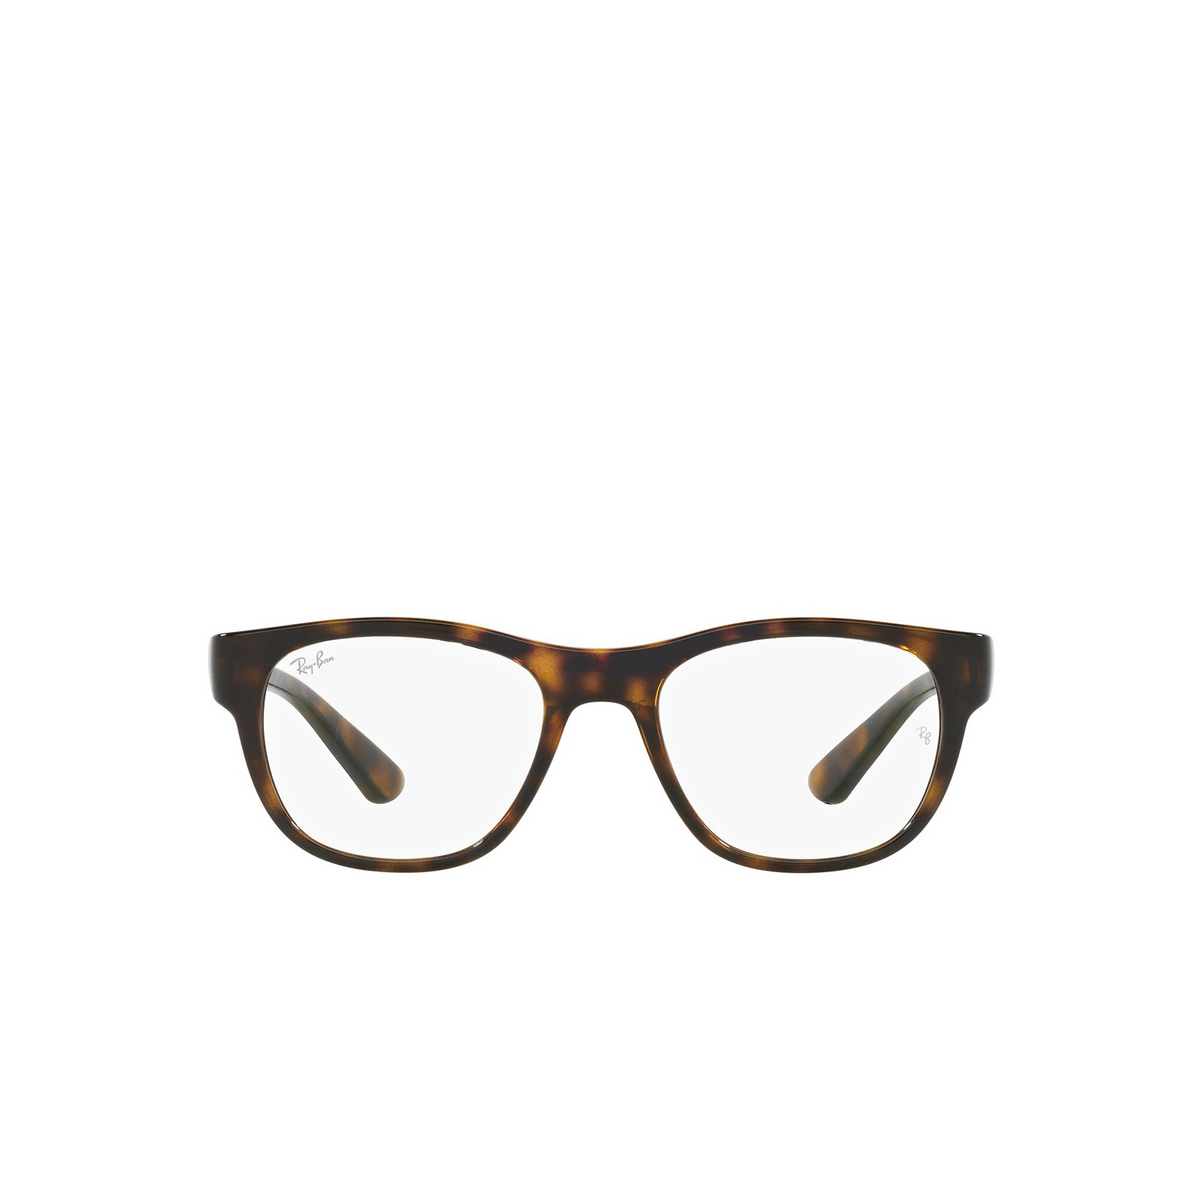 Ray-Ban® Square Eyeglasses: RX7191 color Havana 2012 - front view.